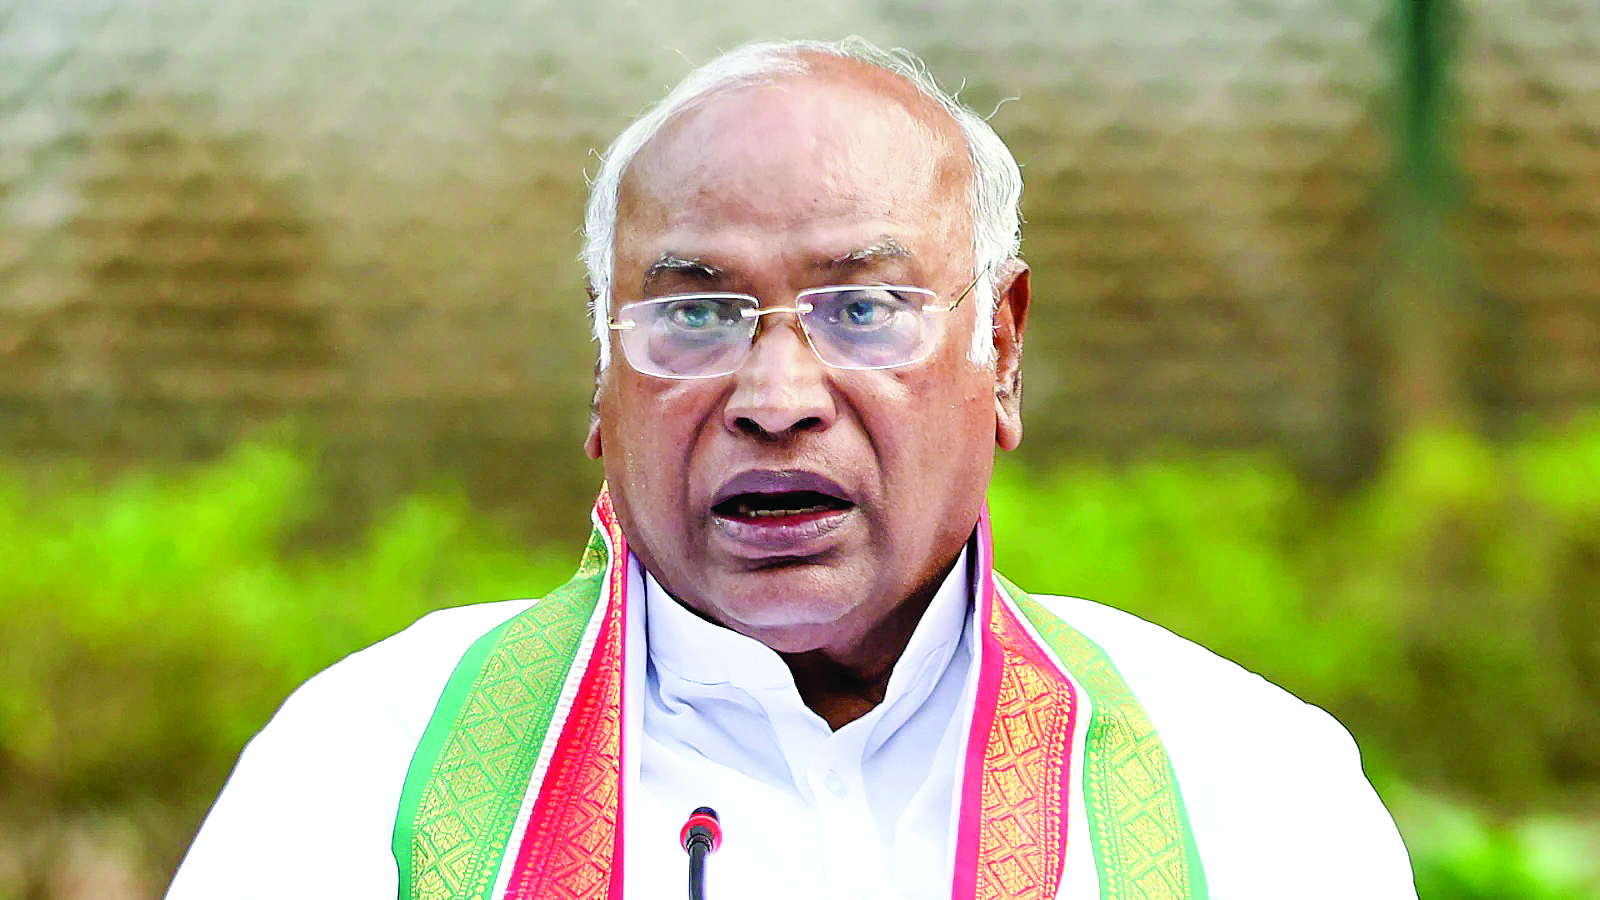 Kharge Takes a Dig at PM Modi Over Inflation, Unemployment